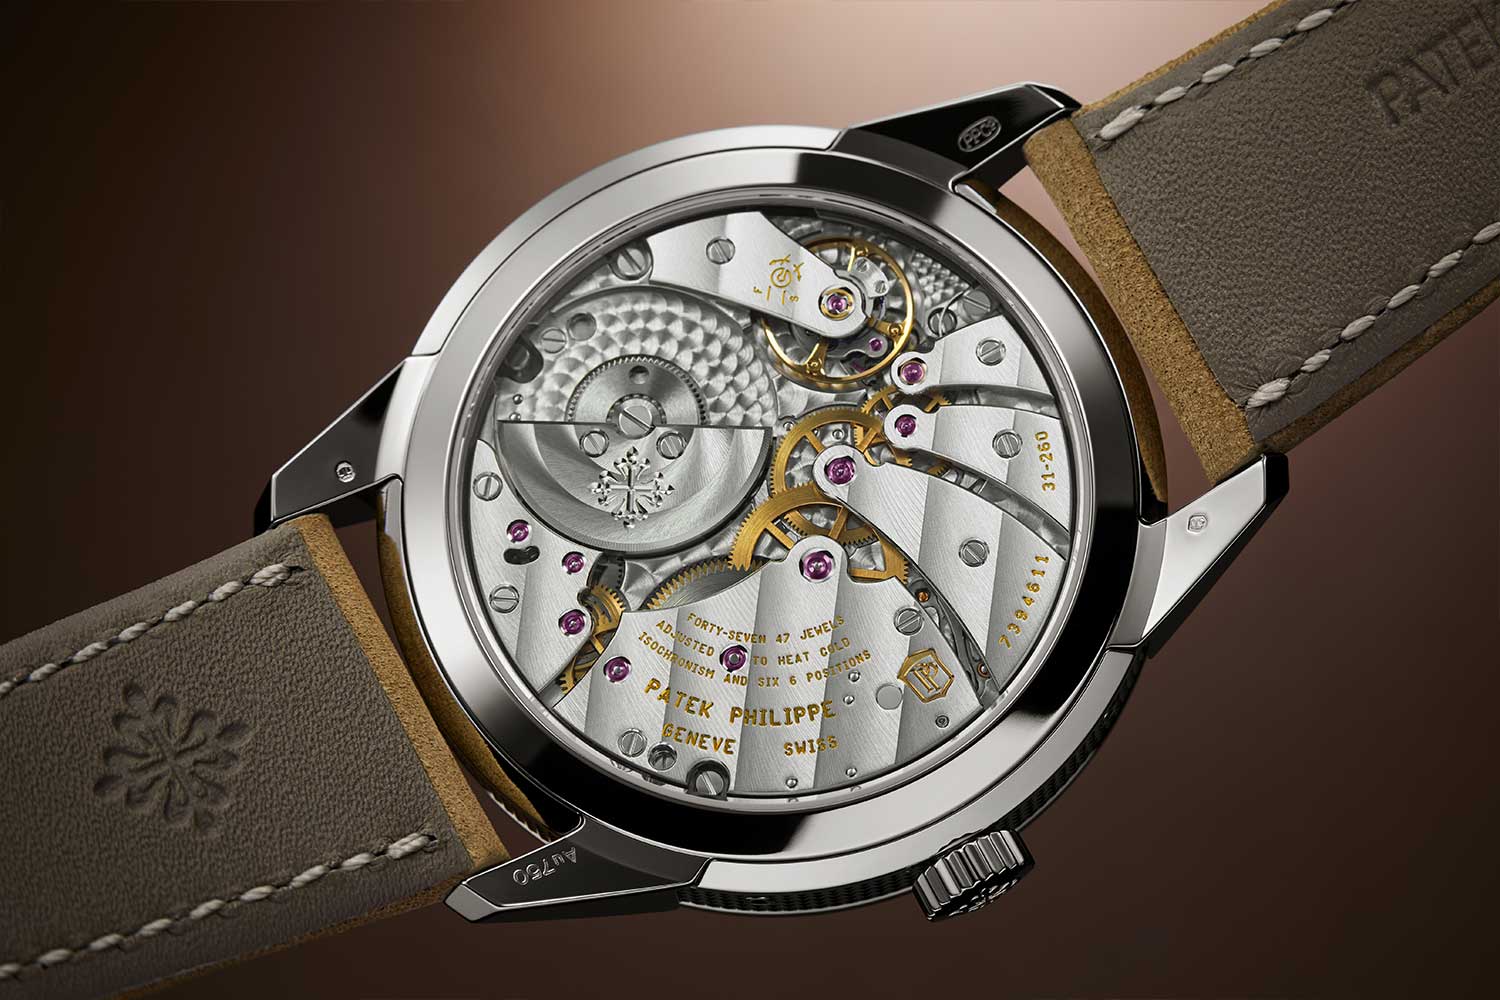 The all new self-winding caliber 31-260 PS QA LU FUS 24H, which for the first time brings together the Annual Calendar and Travel Time complications